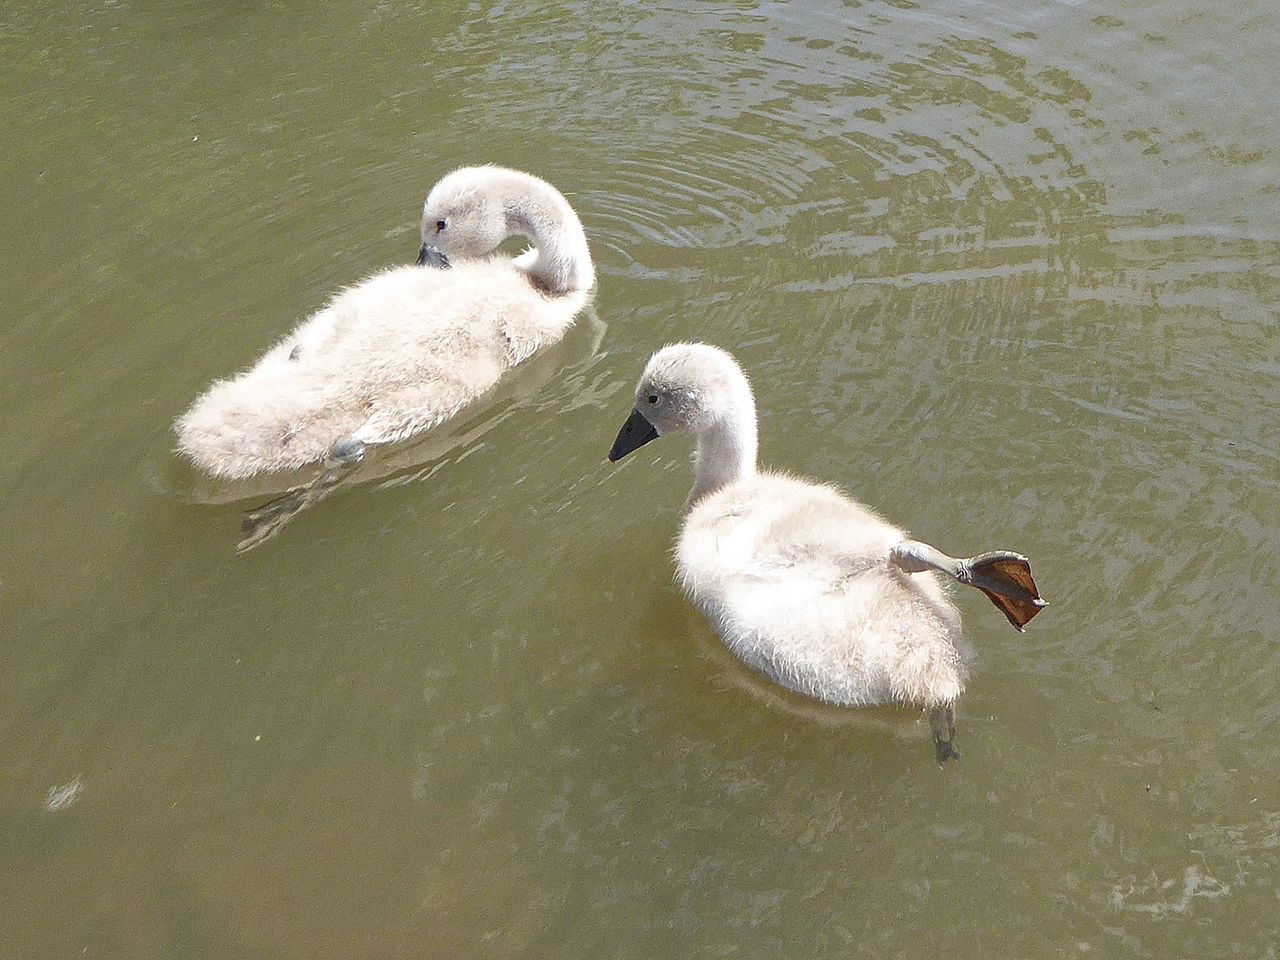 HIGH ANGLE VIEW OF SWANS SWIMMING ON LAKE